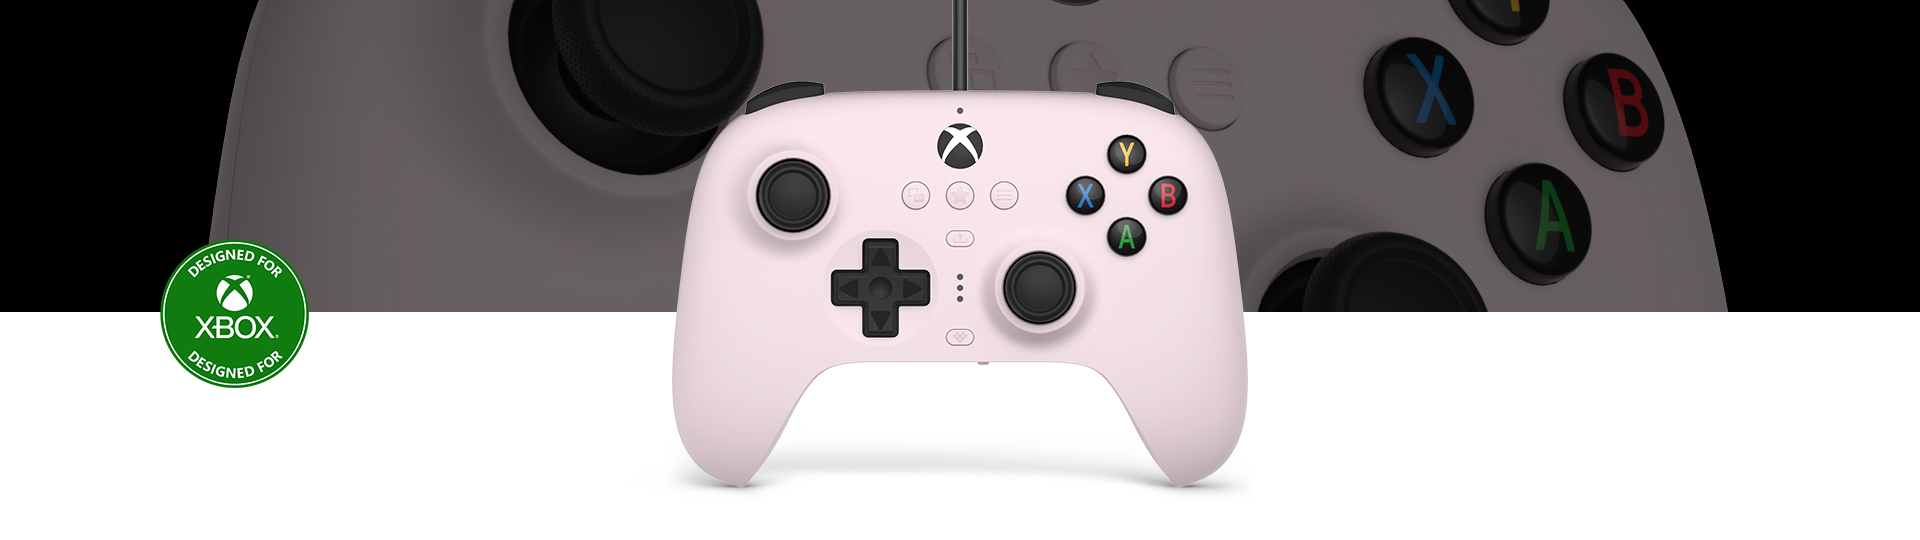 8BitDo Ultimate Wired Controller for Xbox - Pastel Pink in front of a close up of the controller with Designed for Xbox badge